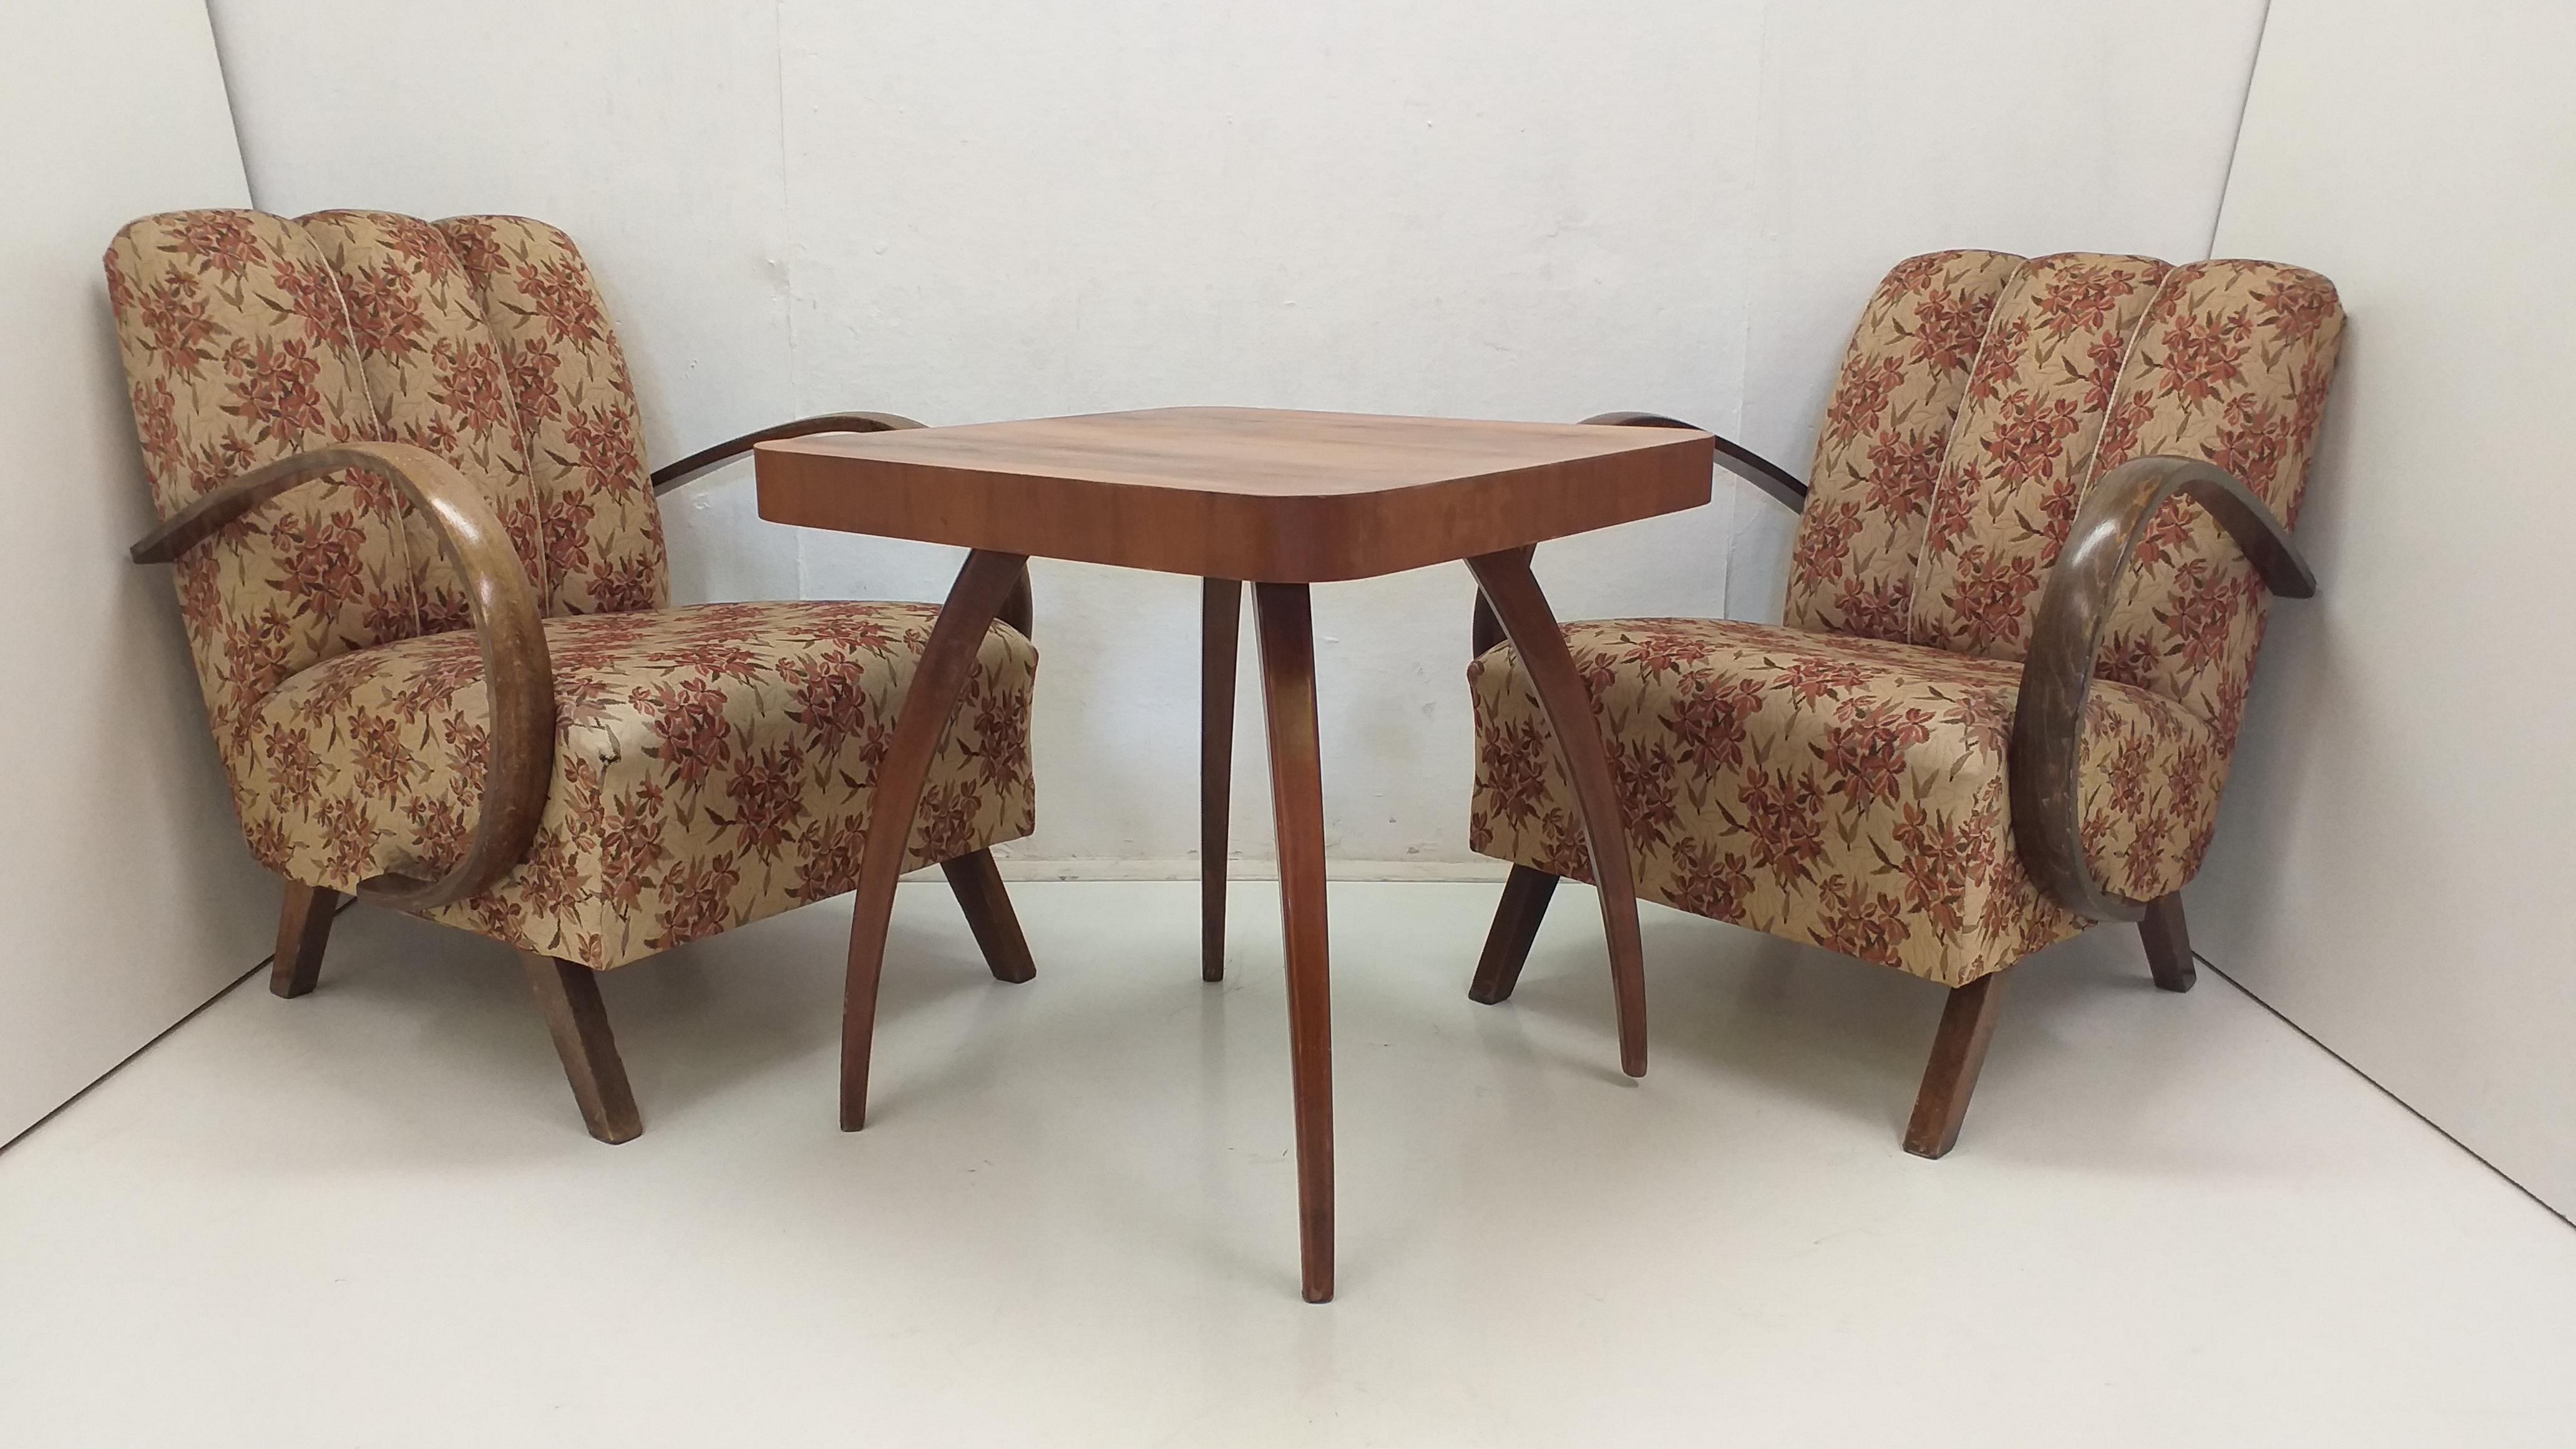 - 2 pieces of armchairs and coffee table designed by Jindrich Halabala 1948
- production UP závody Czechoslovakia
- all in very good condition
- table size? height 65cm upper area 65 x 65 cm.
    